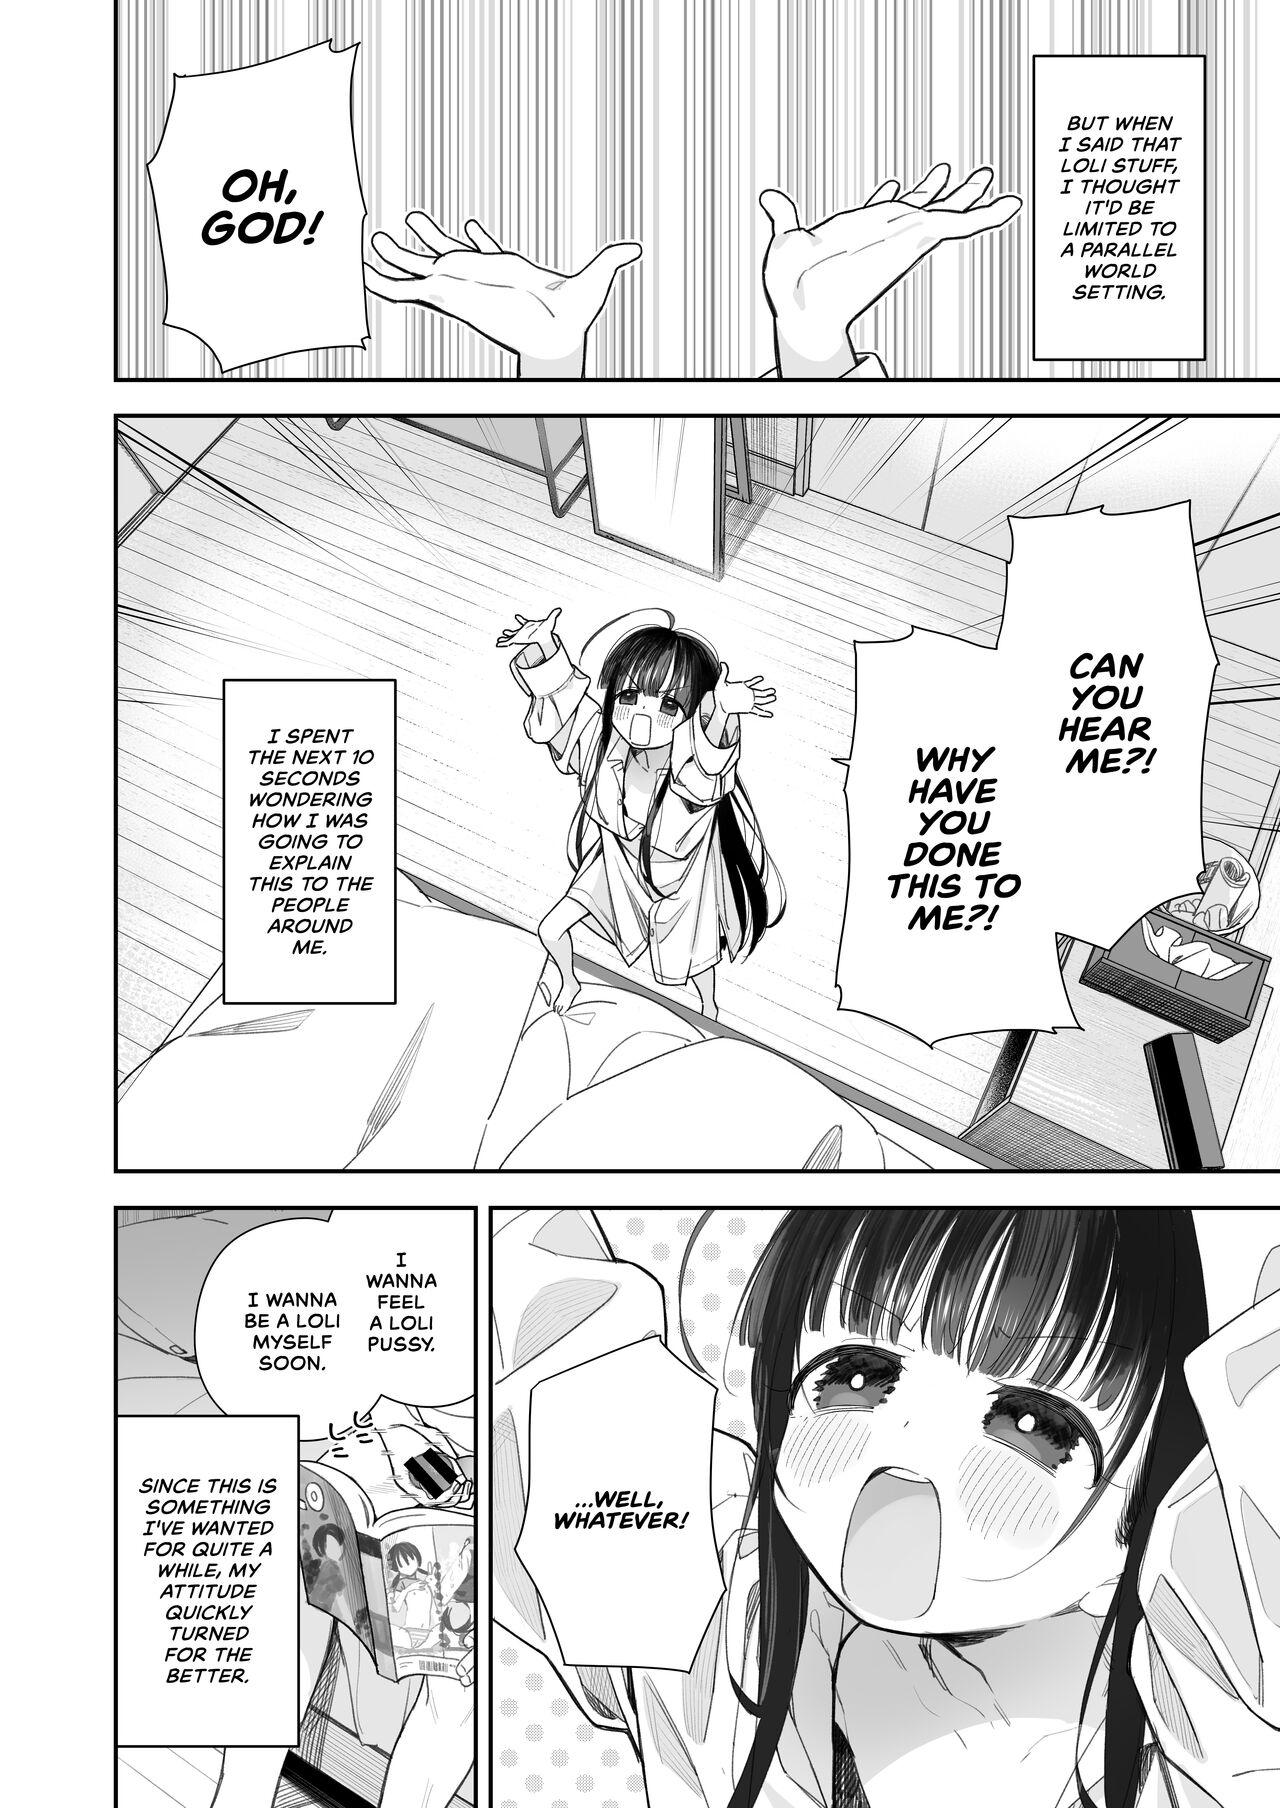 Argentina [Asunaro Neat. (Ronna)] TS Loli Oji-san no Bouken Onanie Hen | The Adventures of an Old Man Who Was Gender-Swapped Into a Loli ~Masturbation Chapter~ [English] [CulturedCommissions] [Digital] - Original Facial Cumshot - Page 5